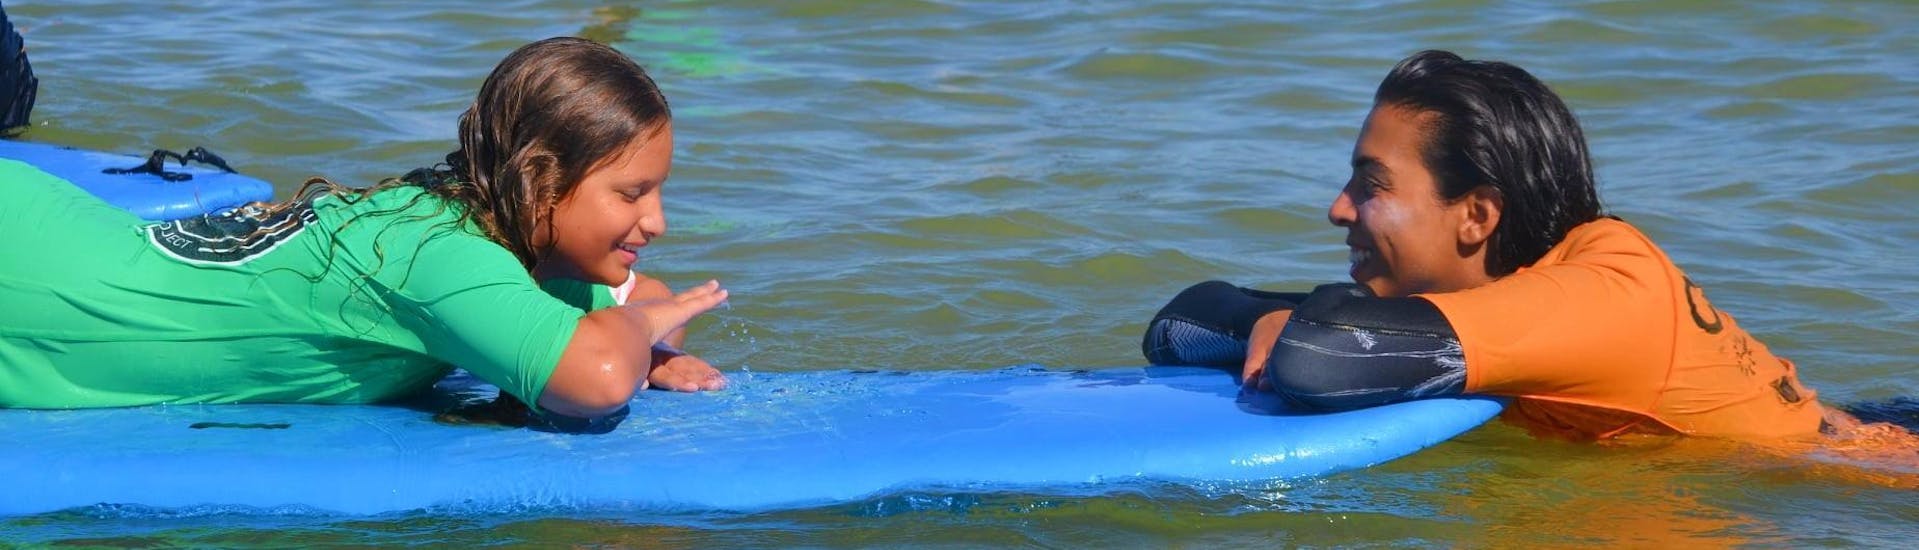 A surf instructor from Vilamoura Surf Project explains the correct surfing technique to a child.